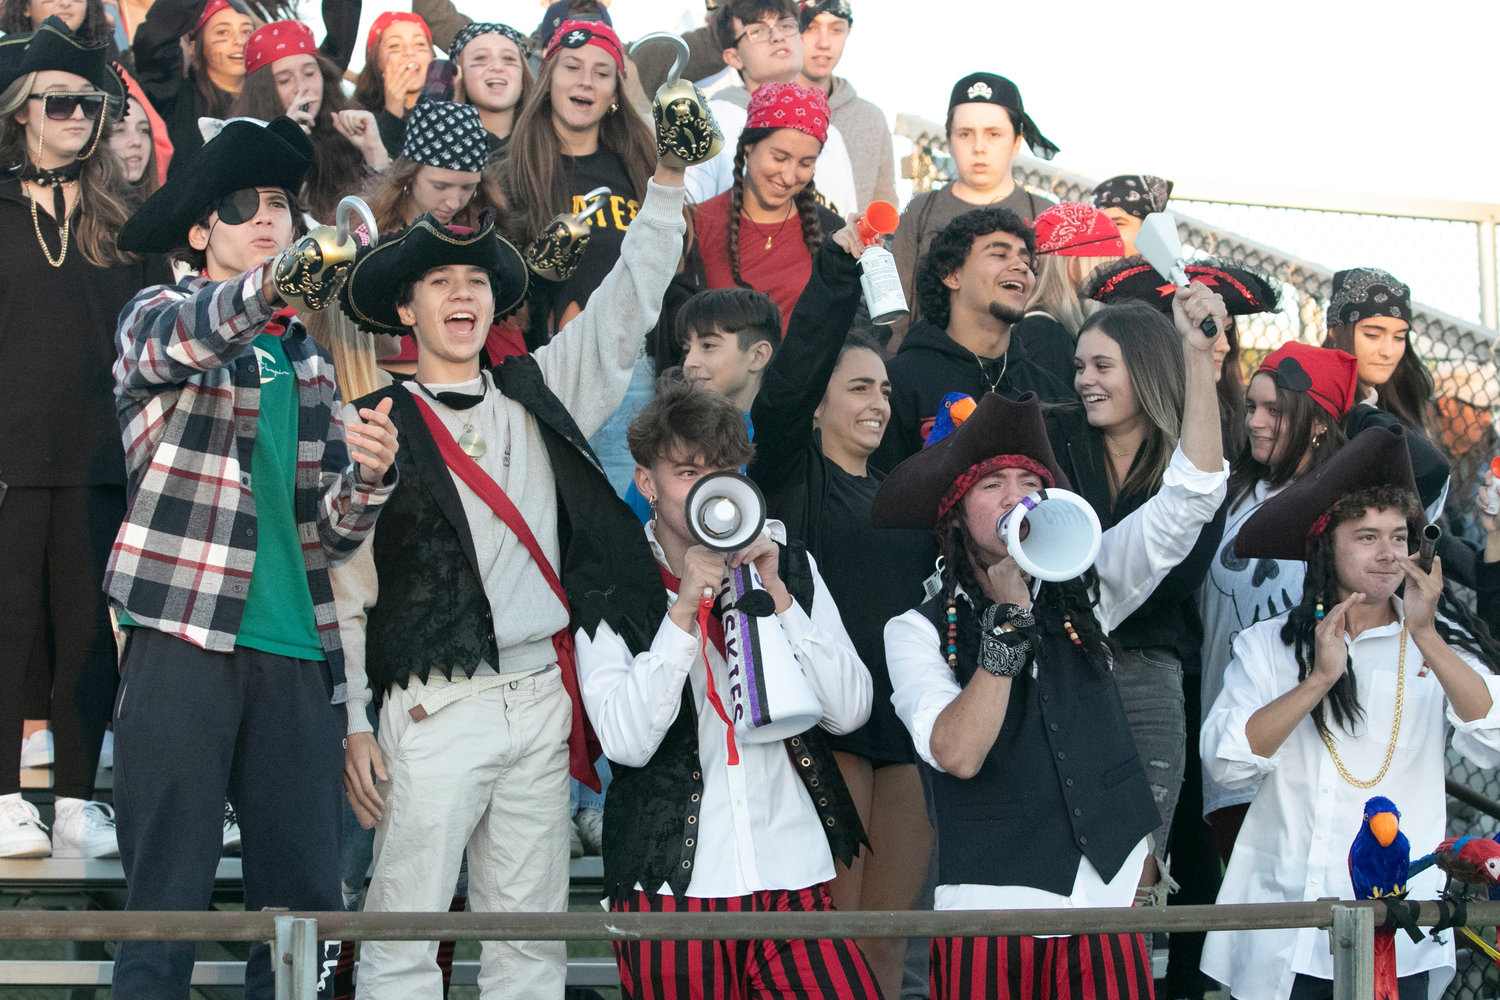 Ben Flynn (bottom left), Chris Frawley, Josh DeWolf and the Huskies ‘Dog Pound,’ cheered on the soccer team donned in pirate gear, prior to the football game that started at 7 p.m.